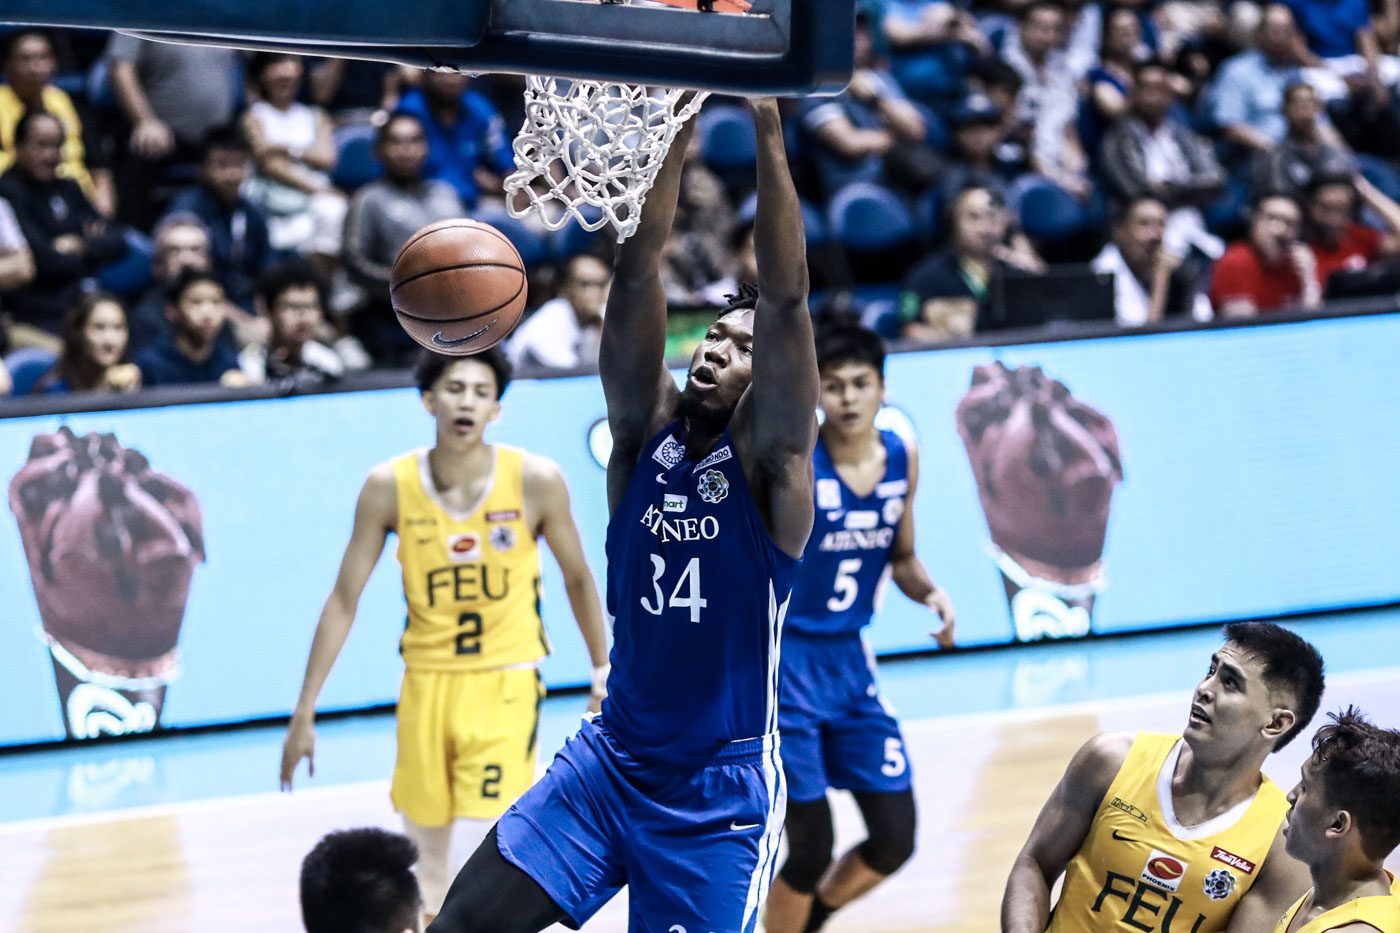 Depleted Ateneo exacts revenge in FEU rout